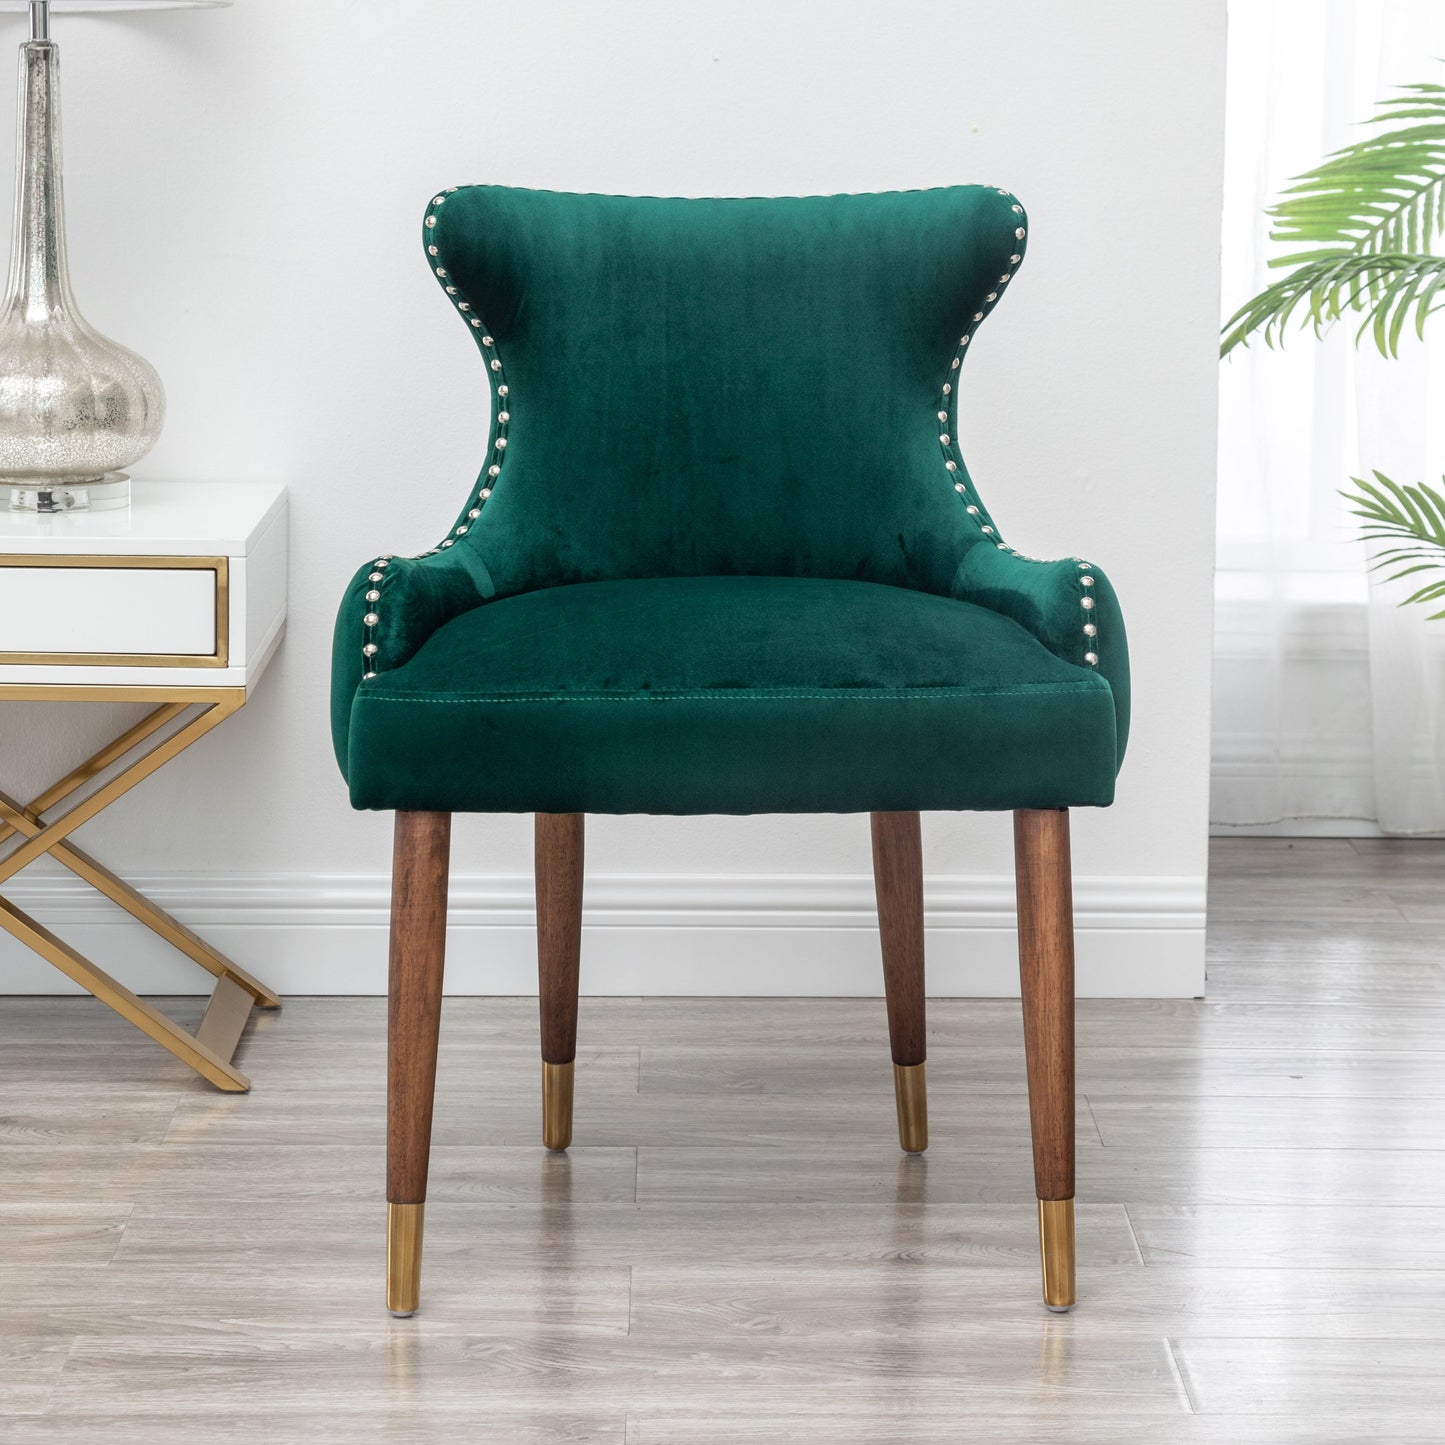 Lindale Contemporary Velvet Upholstered Nailhead Trim Accent Chair, Green